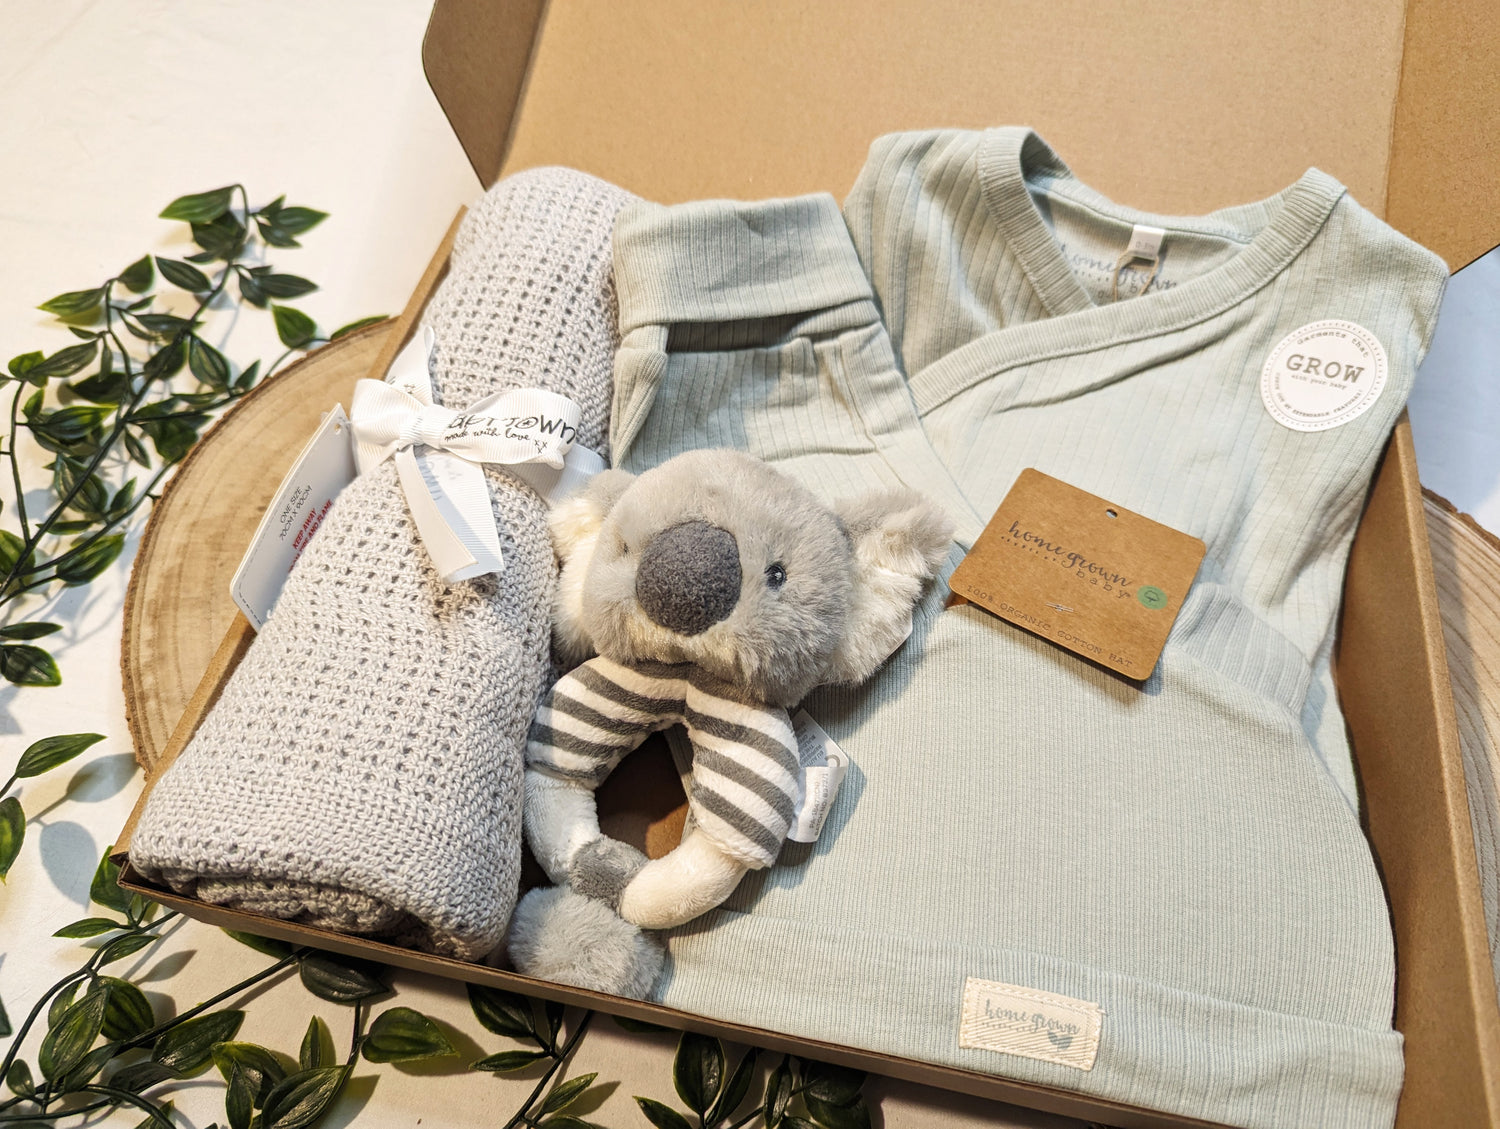 Unisex baby clothing gift packaged in a brown cardboard presentation box, includes a grey cellular baby blanket, baby koala soft ring rattle and three piece organic baby clothing outfit in sage green. The three piece baby clothing set includes one pair of ribbed trousers, one bodysuit and one hat with bear ears.  